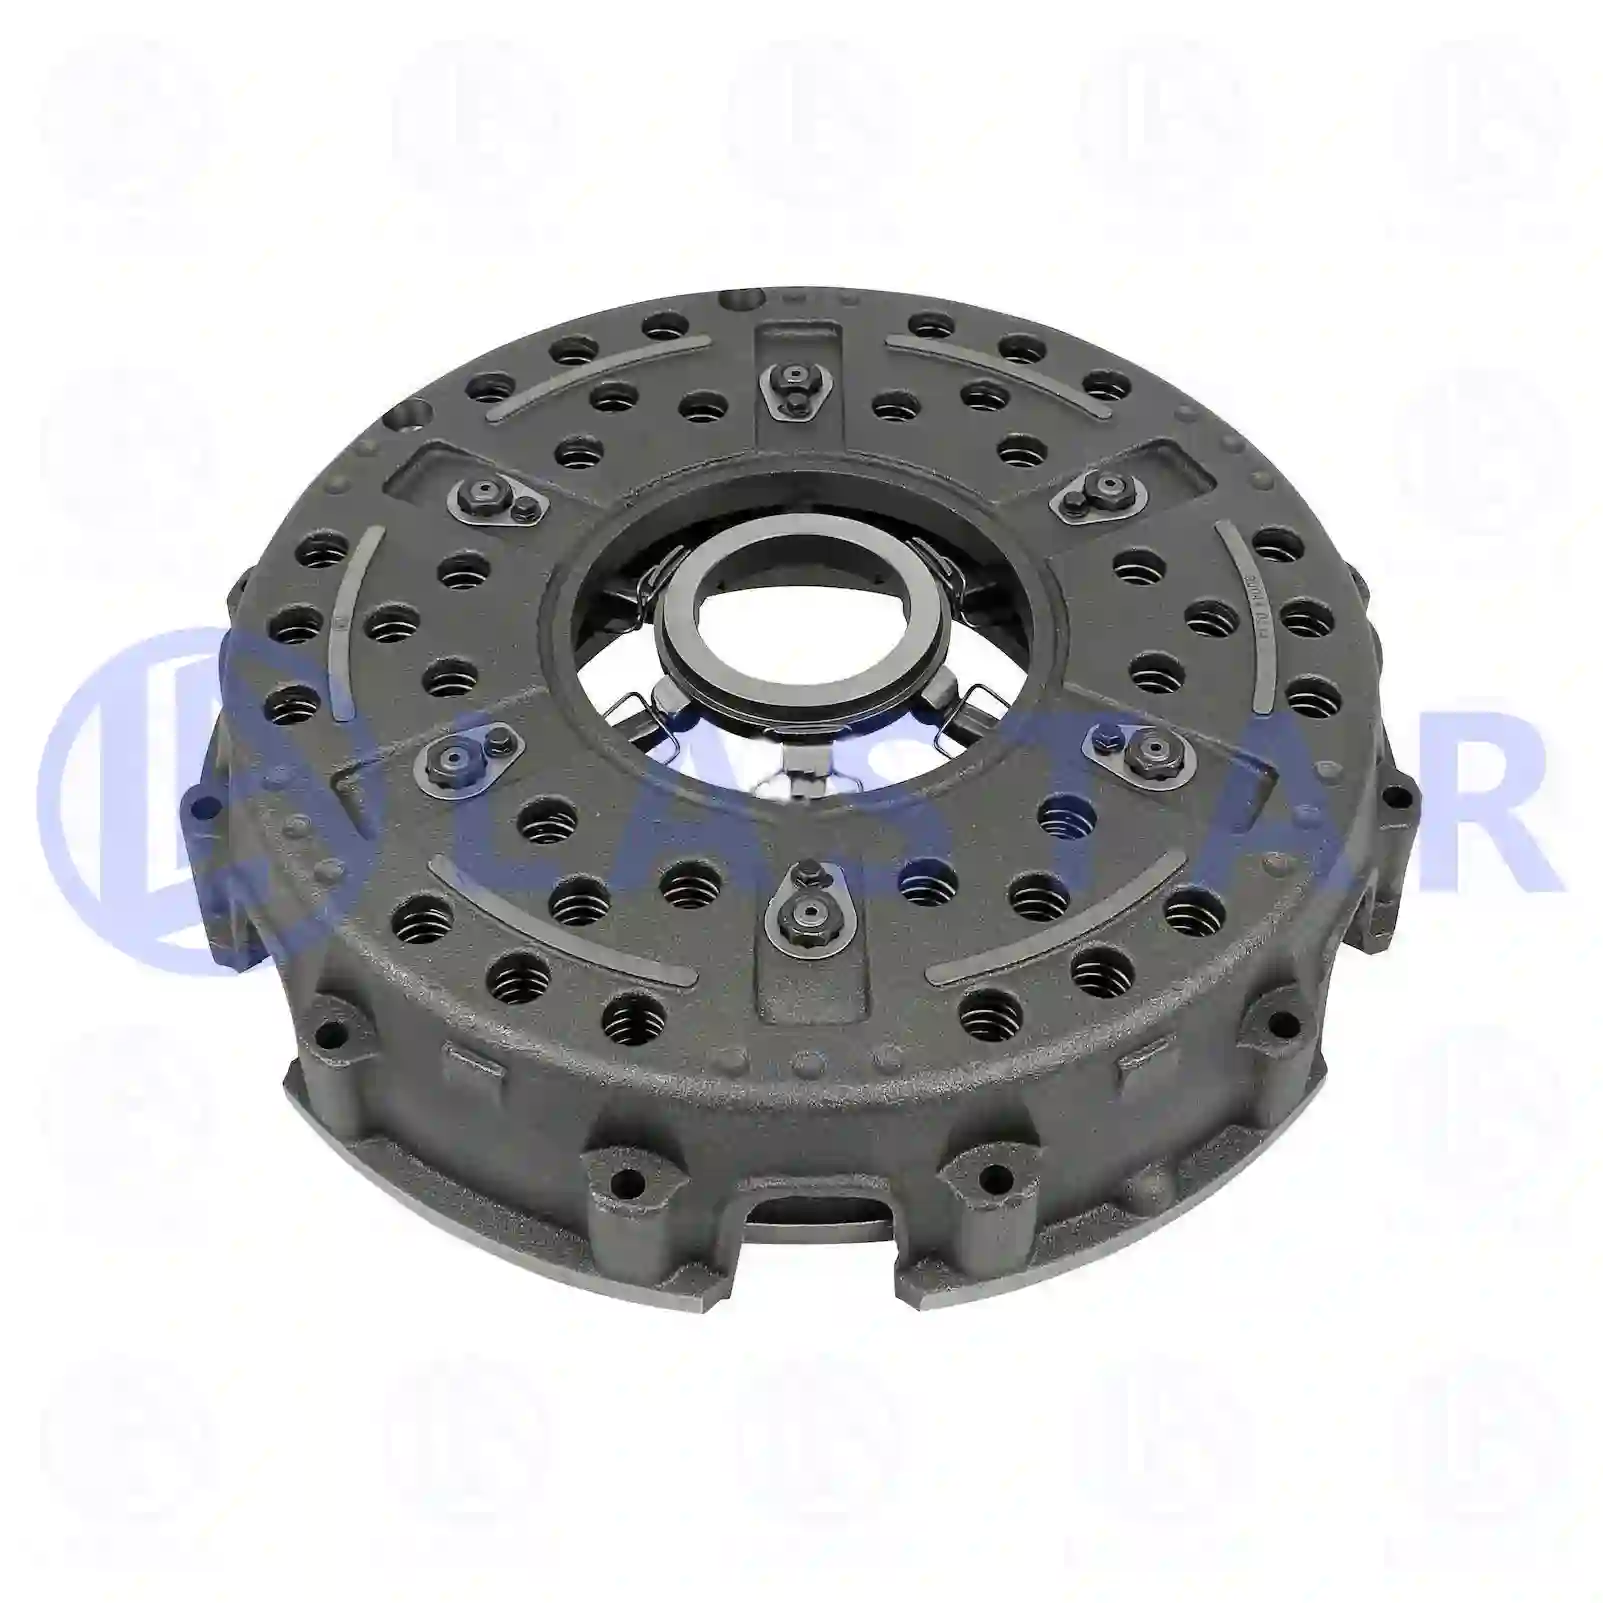 Clutch cover, 77722019, 000250201100, 0890589, 0012508504, 0022503804, 0032500004, 0032502604, 81303059111, 0022503204, 0022504104, 0022509904, 0032500004, 0032502604, 0032504104, 0032507004, 003250700480, 0312500104, 040110100, 632100240 ||  77722019 Lastar Spare Part | Truck Spare Parts, Auotomotive Spare Parts Clutch cover, 77722019, 000250201100, 0890589, 0012508504, 0022503804, 0032500004, 0032502604, 81303059111, 0022503204, 0022504104, 0022509904, 0032500004, 0032502604, 0032504104, 0032507004, 003250700480, 0312500104, 040110100, 632100240 ||  77722019 Lastar Spare Part | Truck Spare Parts, Auotomotive Spare Parts